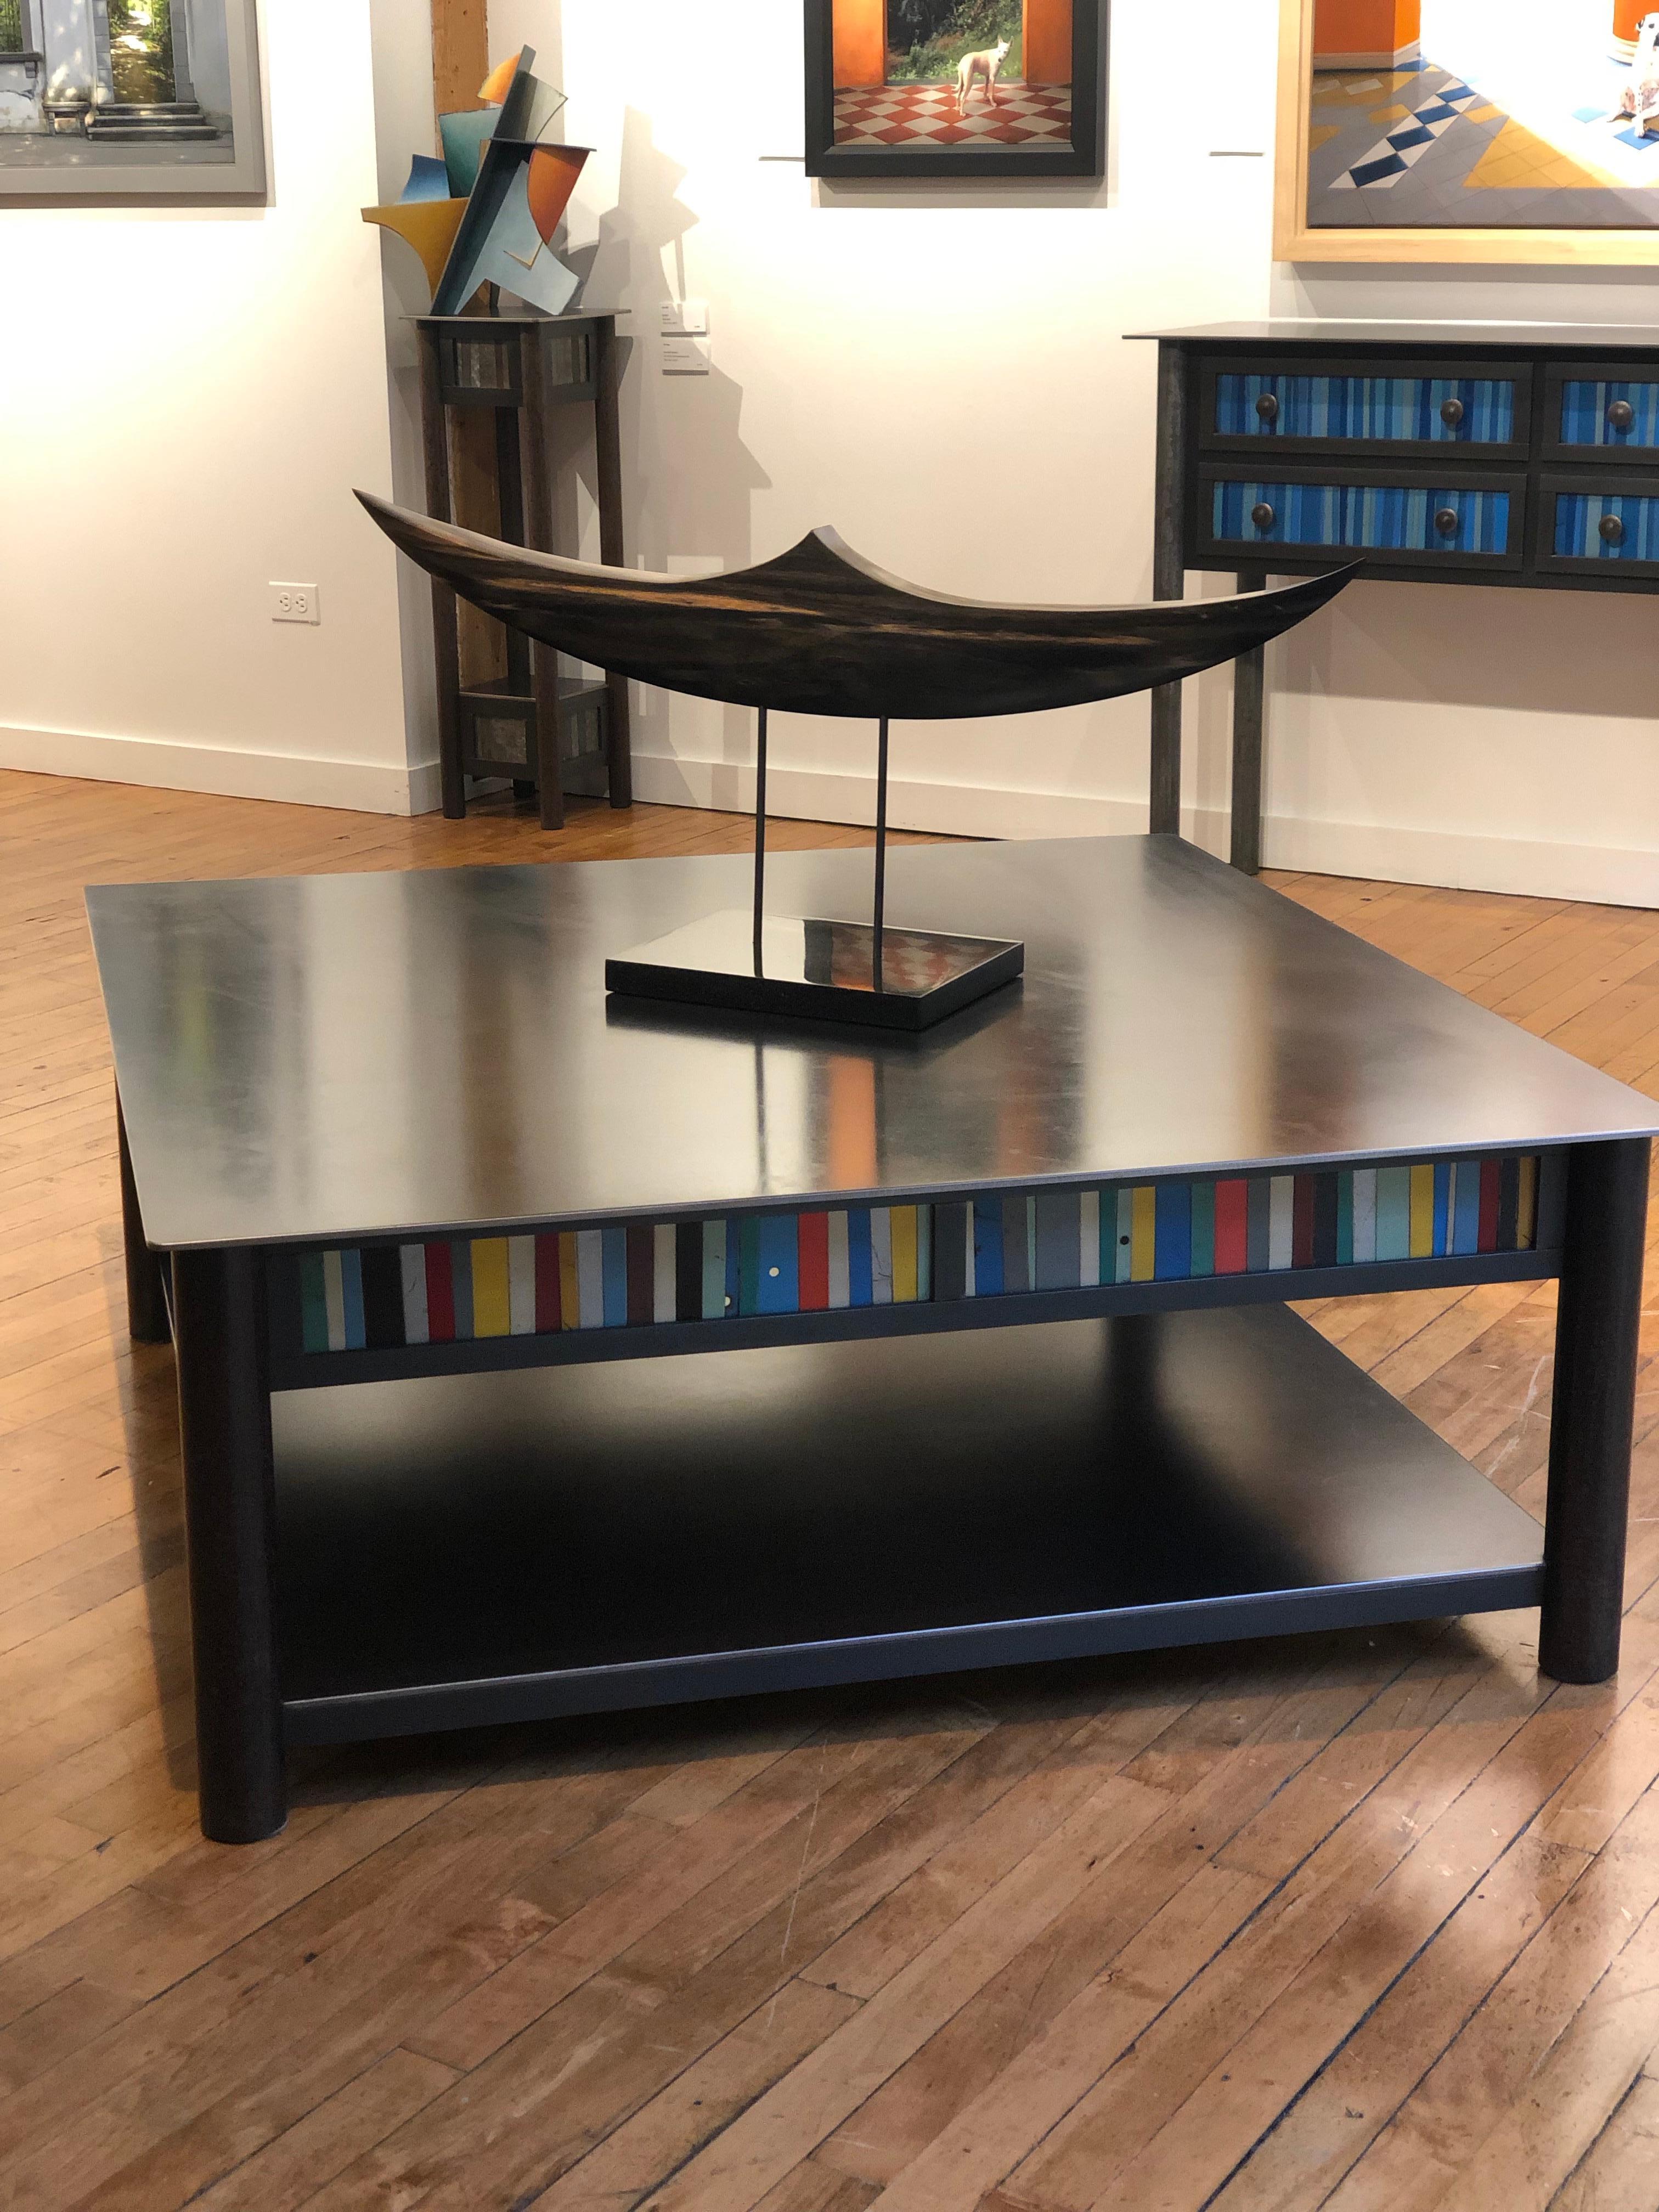 This is a welded steel modern industrial coffee table with a low shelf and a quilted skirt of found metal strips arranged in a quilt pattern inspired by the quilts of Gee's Bend Alabama. Each piece of furniture is unique and made by Jim Rose. The